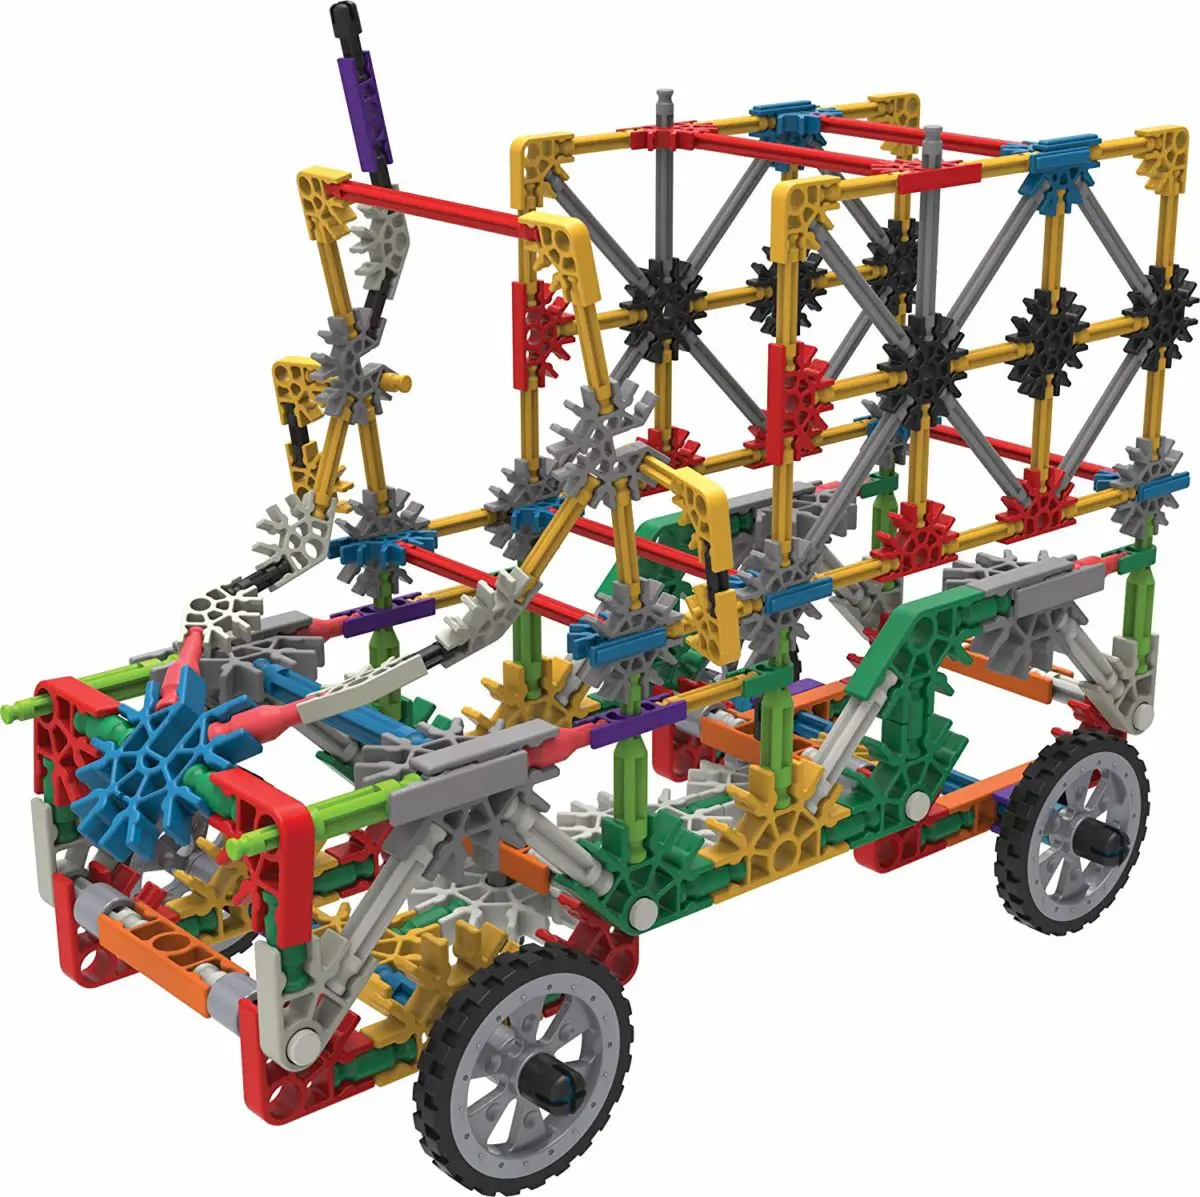 K’NEX 35 Model Building Set - Top Toys and Gifts for Seven Year Old Boys 2